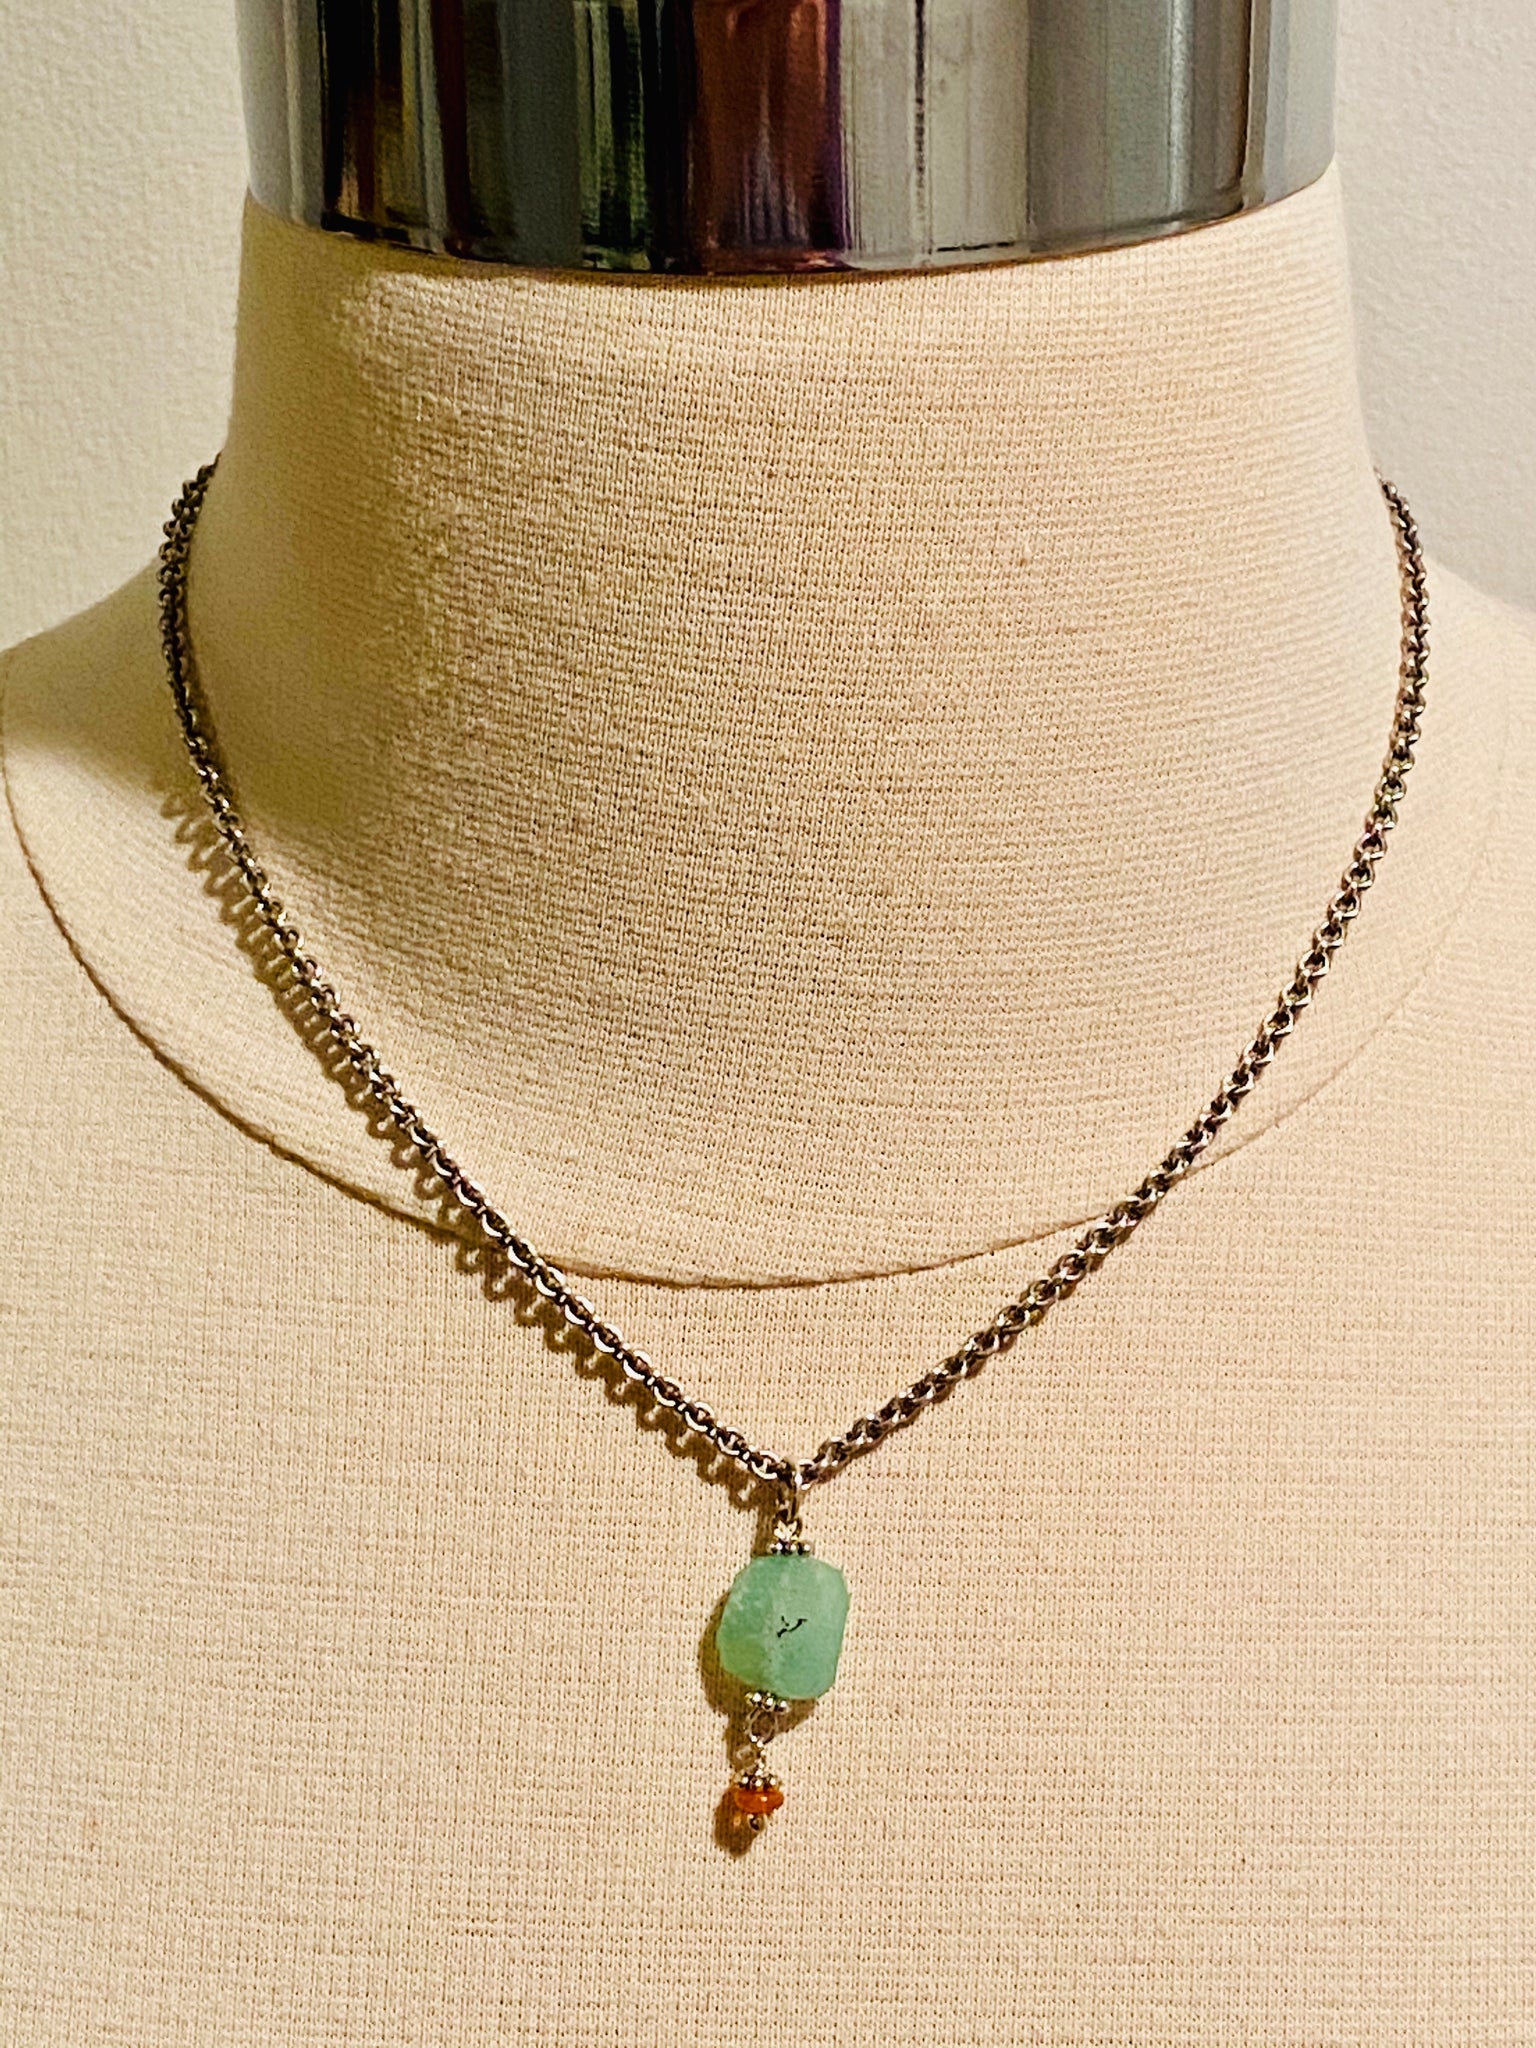 16" Faceted Chrysoprase & Mexican Fire Opal Charm Necklace